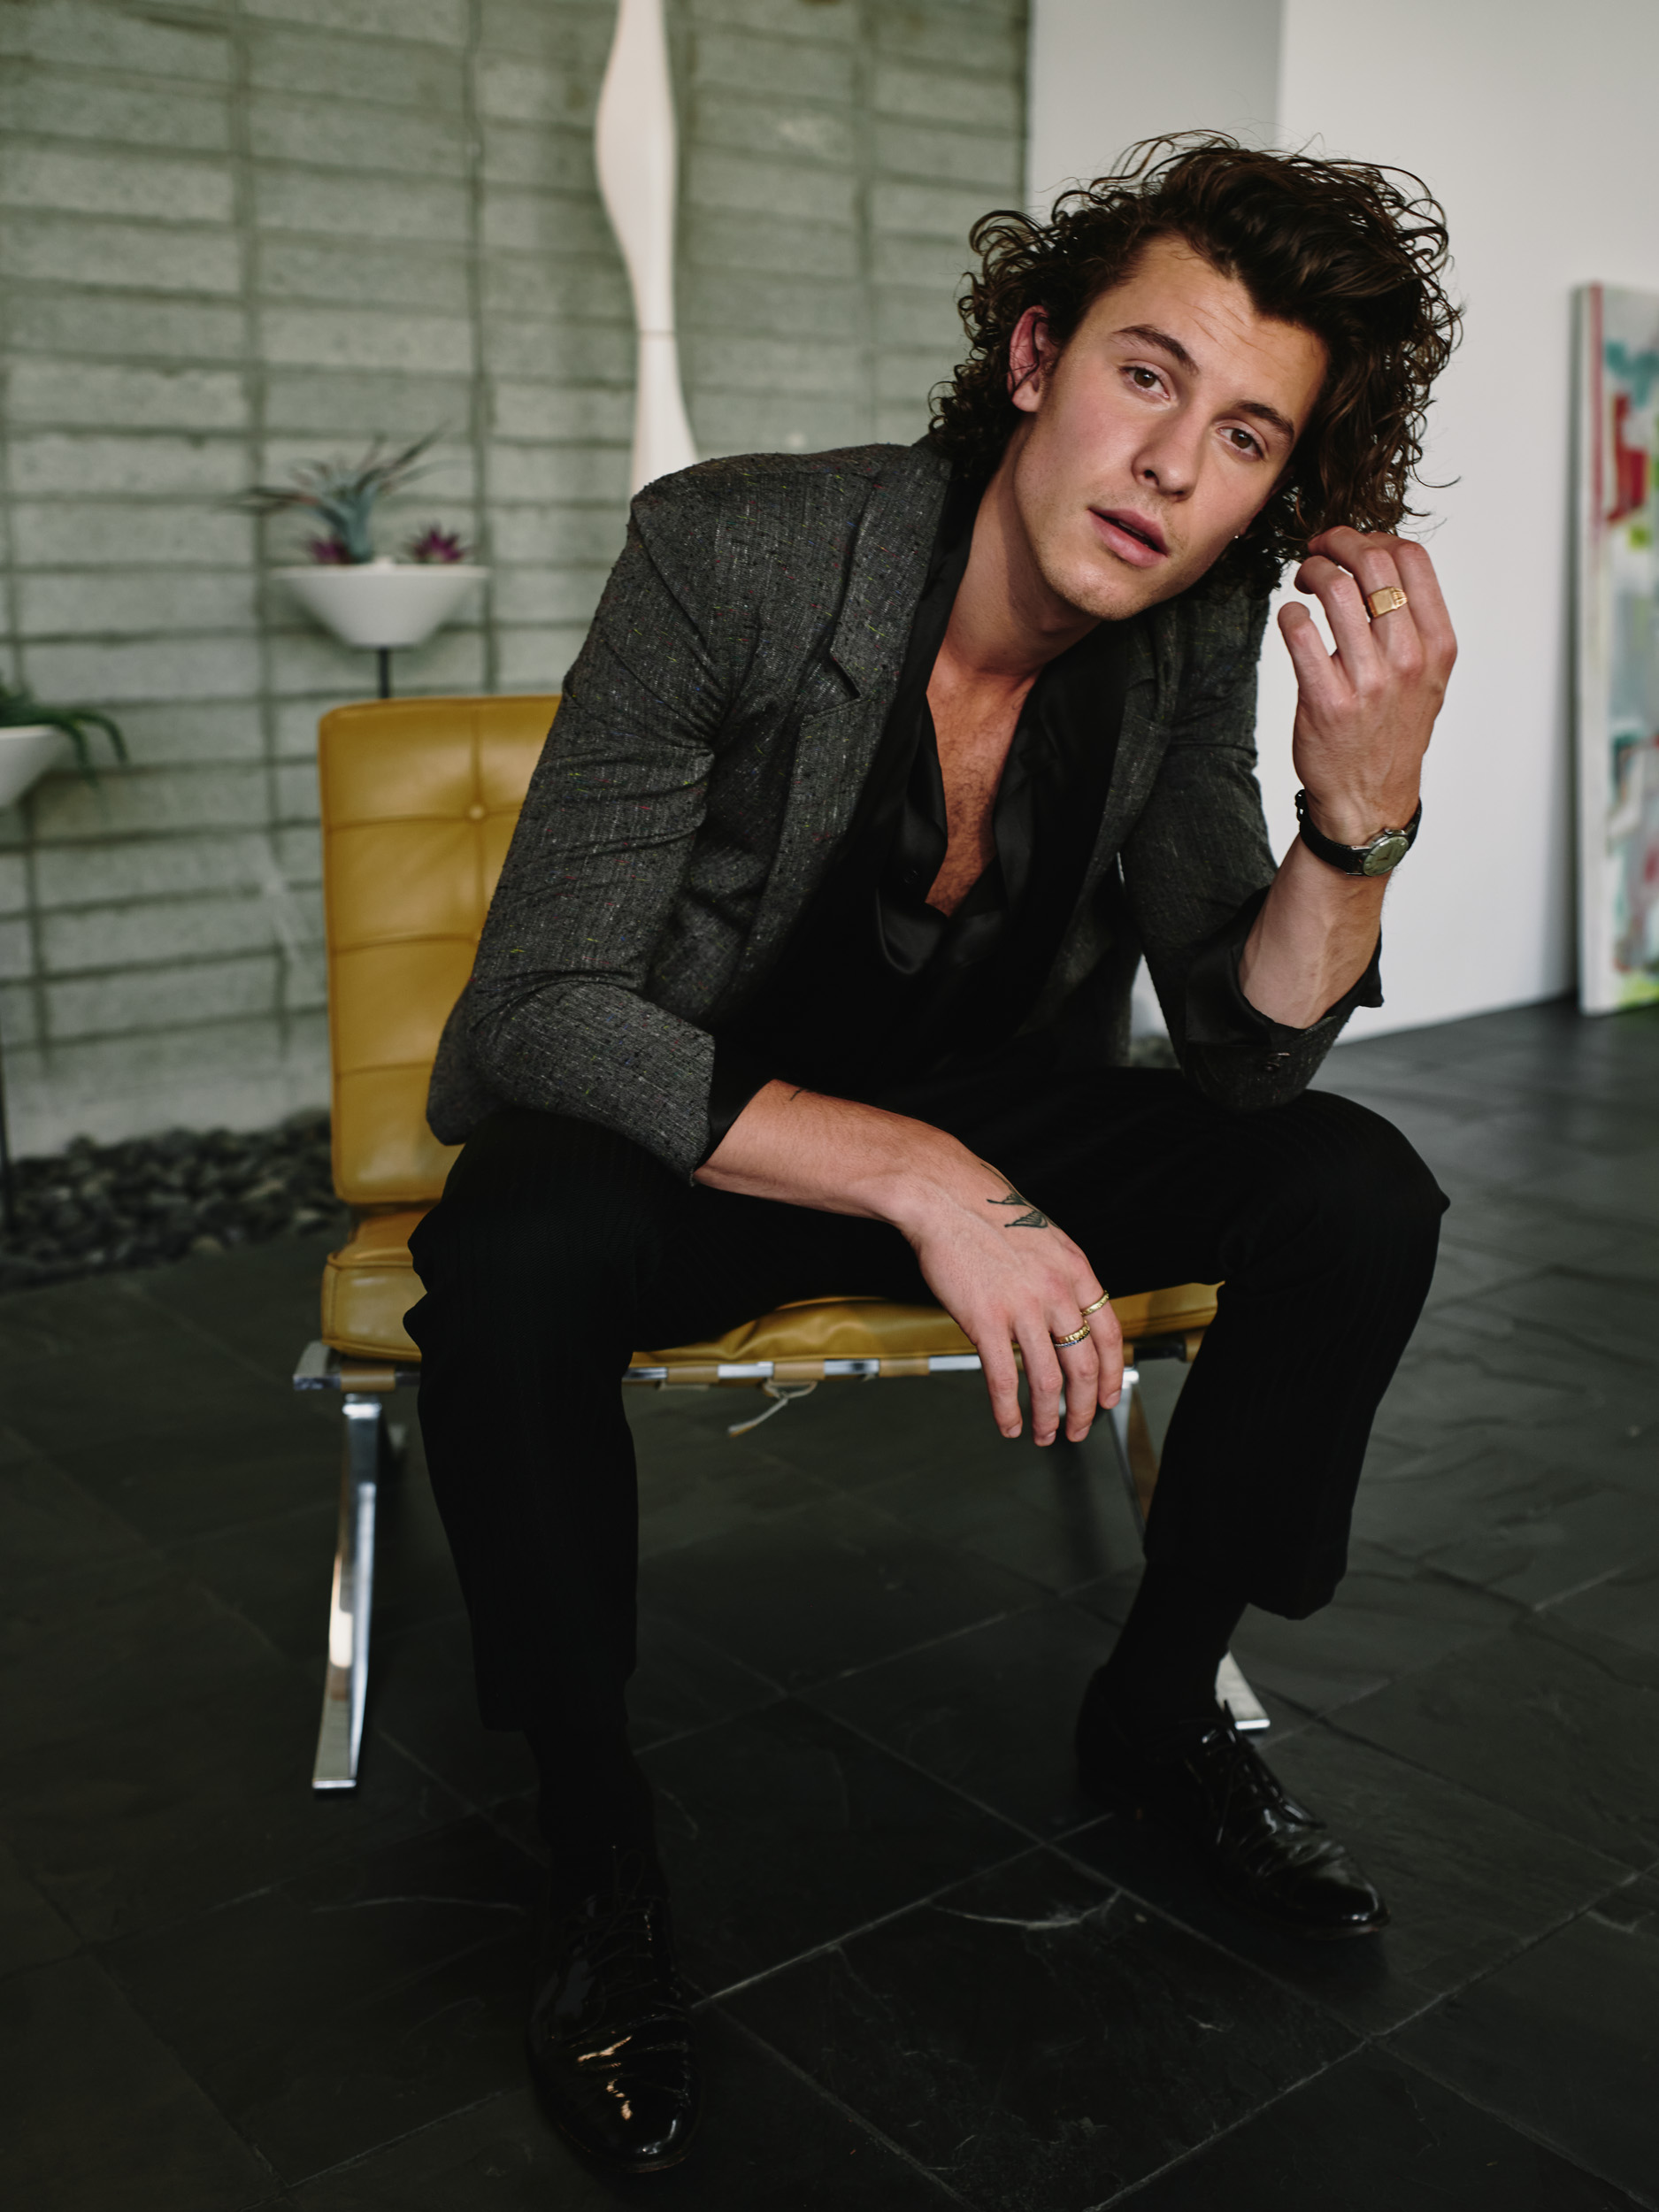 Shawn Mendes Hairstyles And Hair Cuts - Celebrities